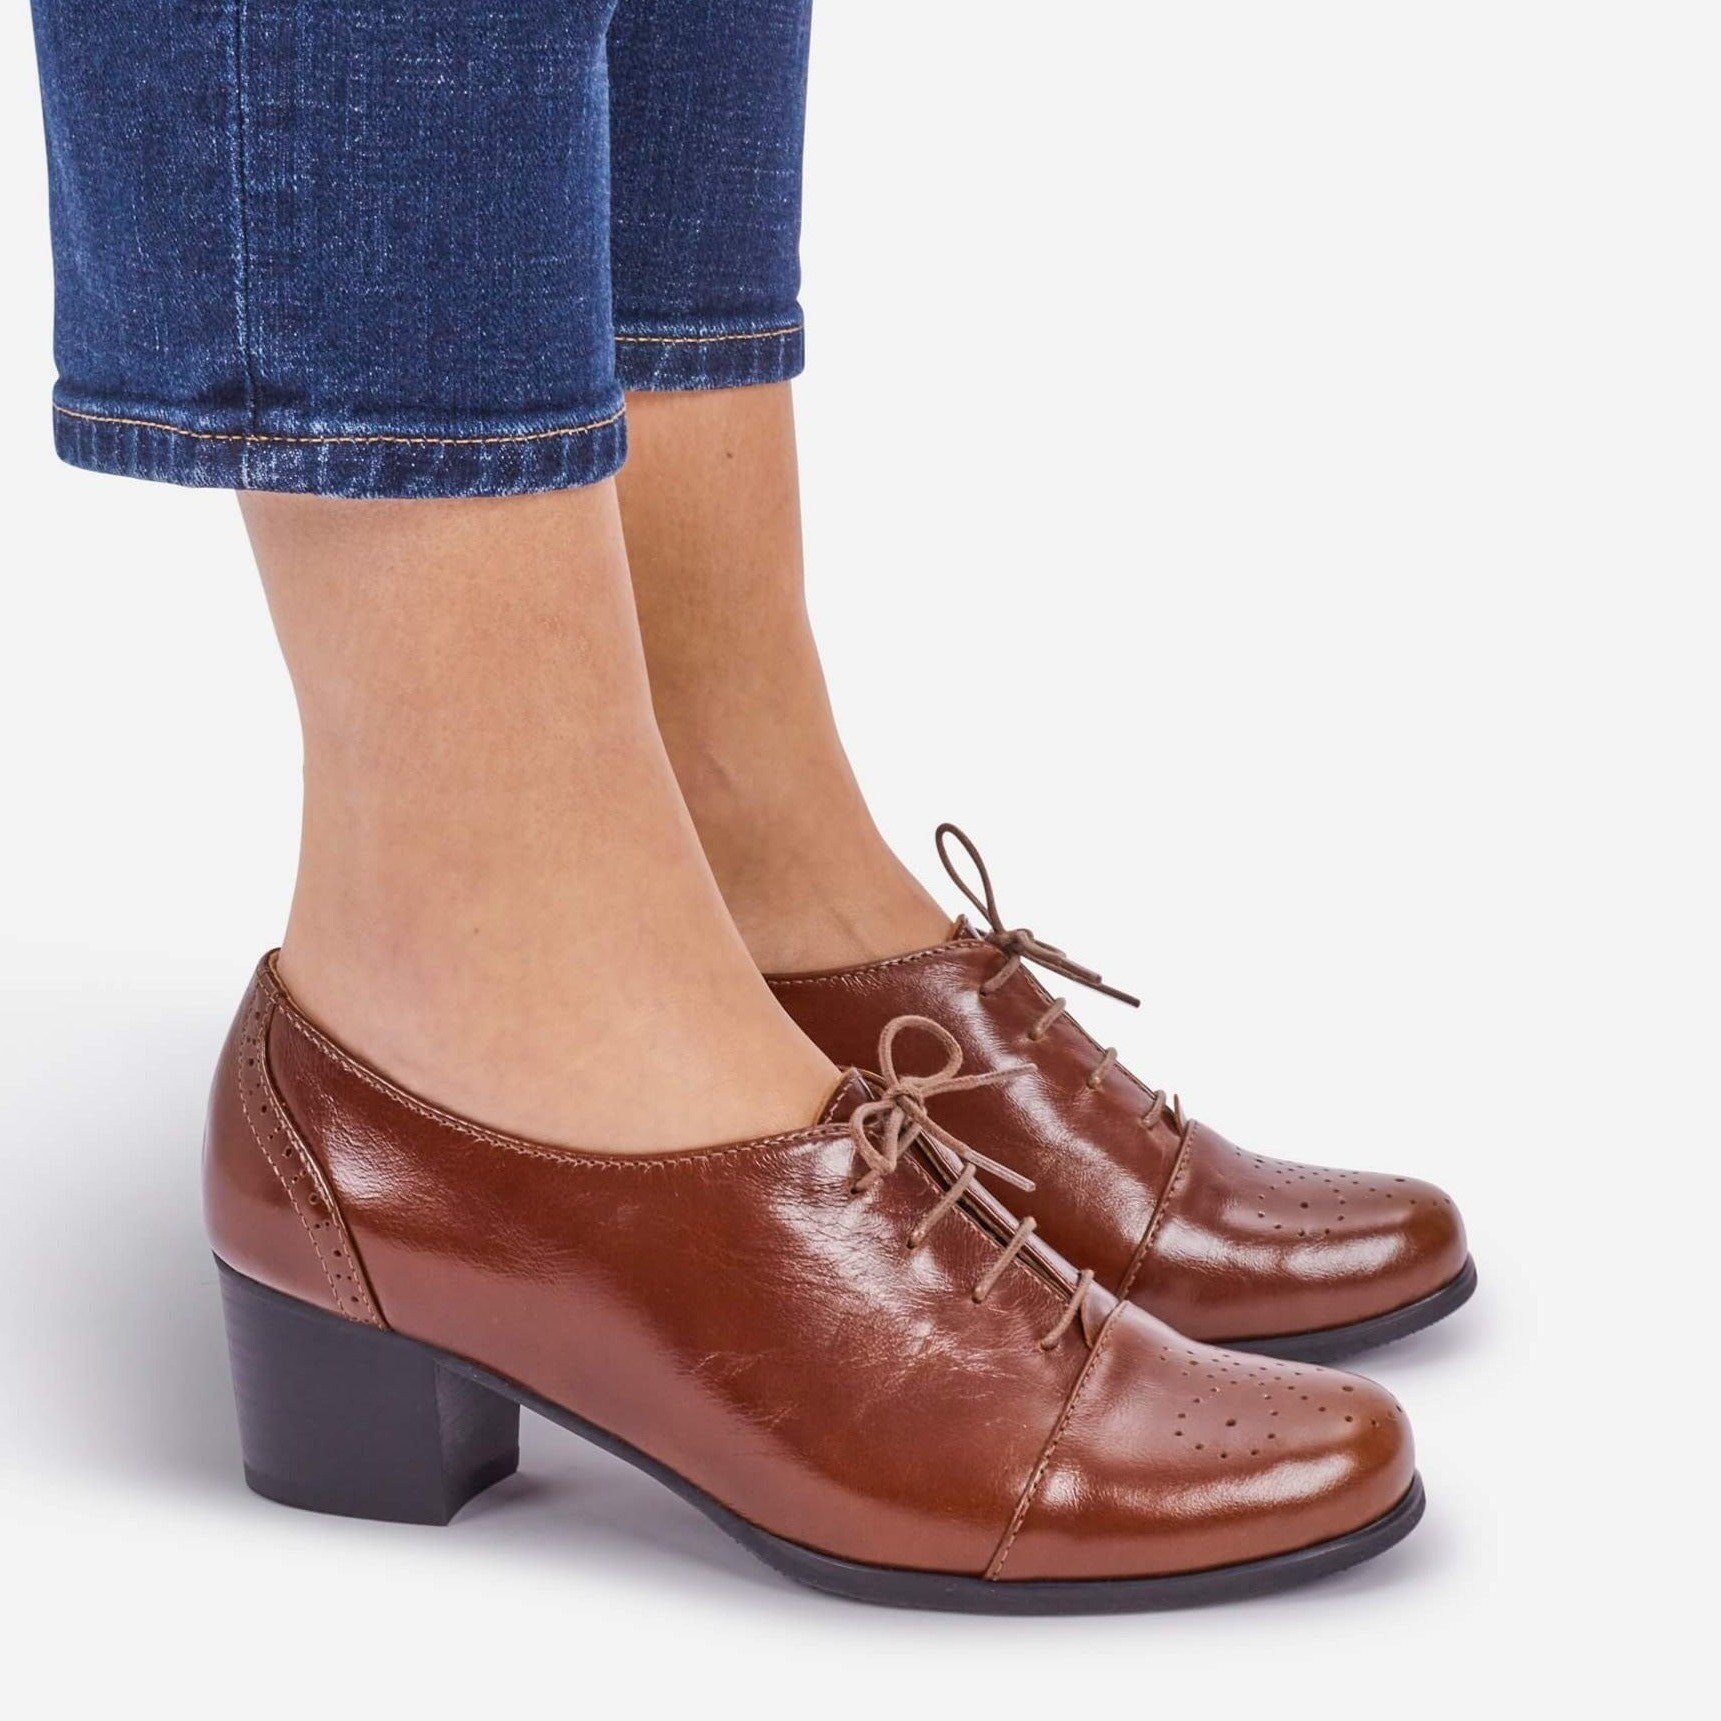 Produktion Panorama Enhed Vienna Oxford Pumps Womens Oxfords Casual Shoes Brown - Etsy